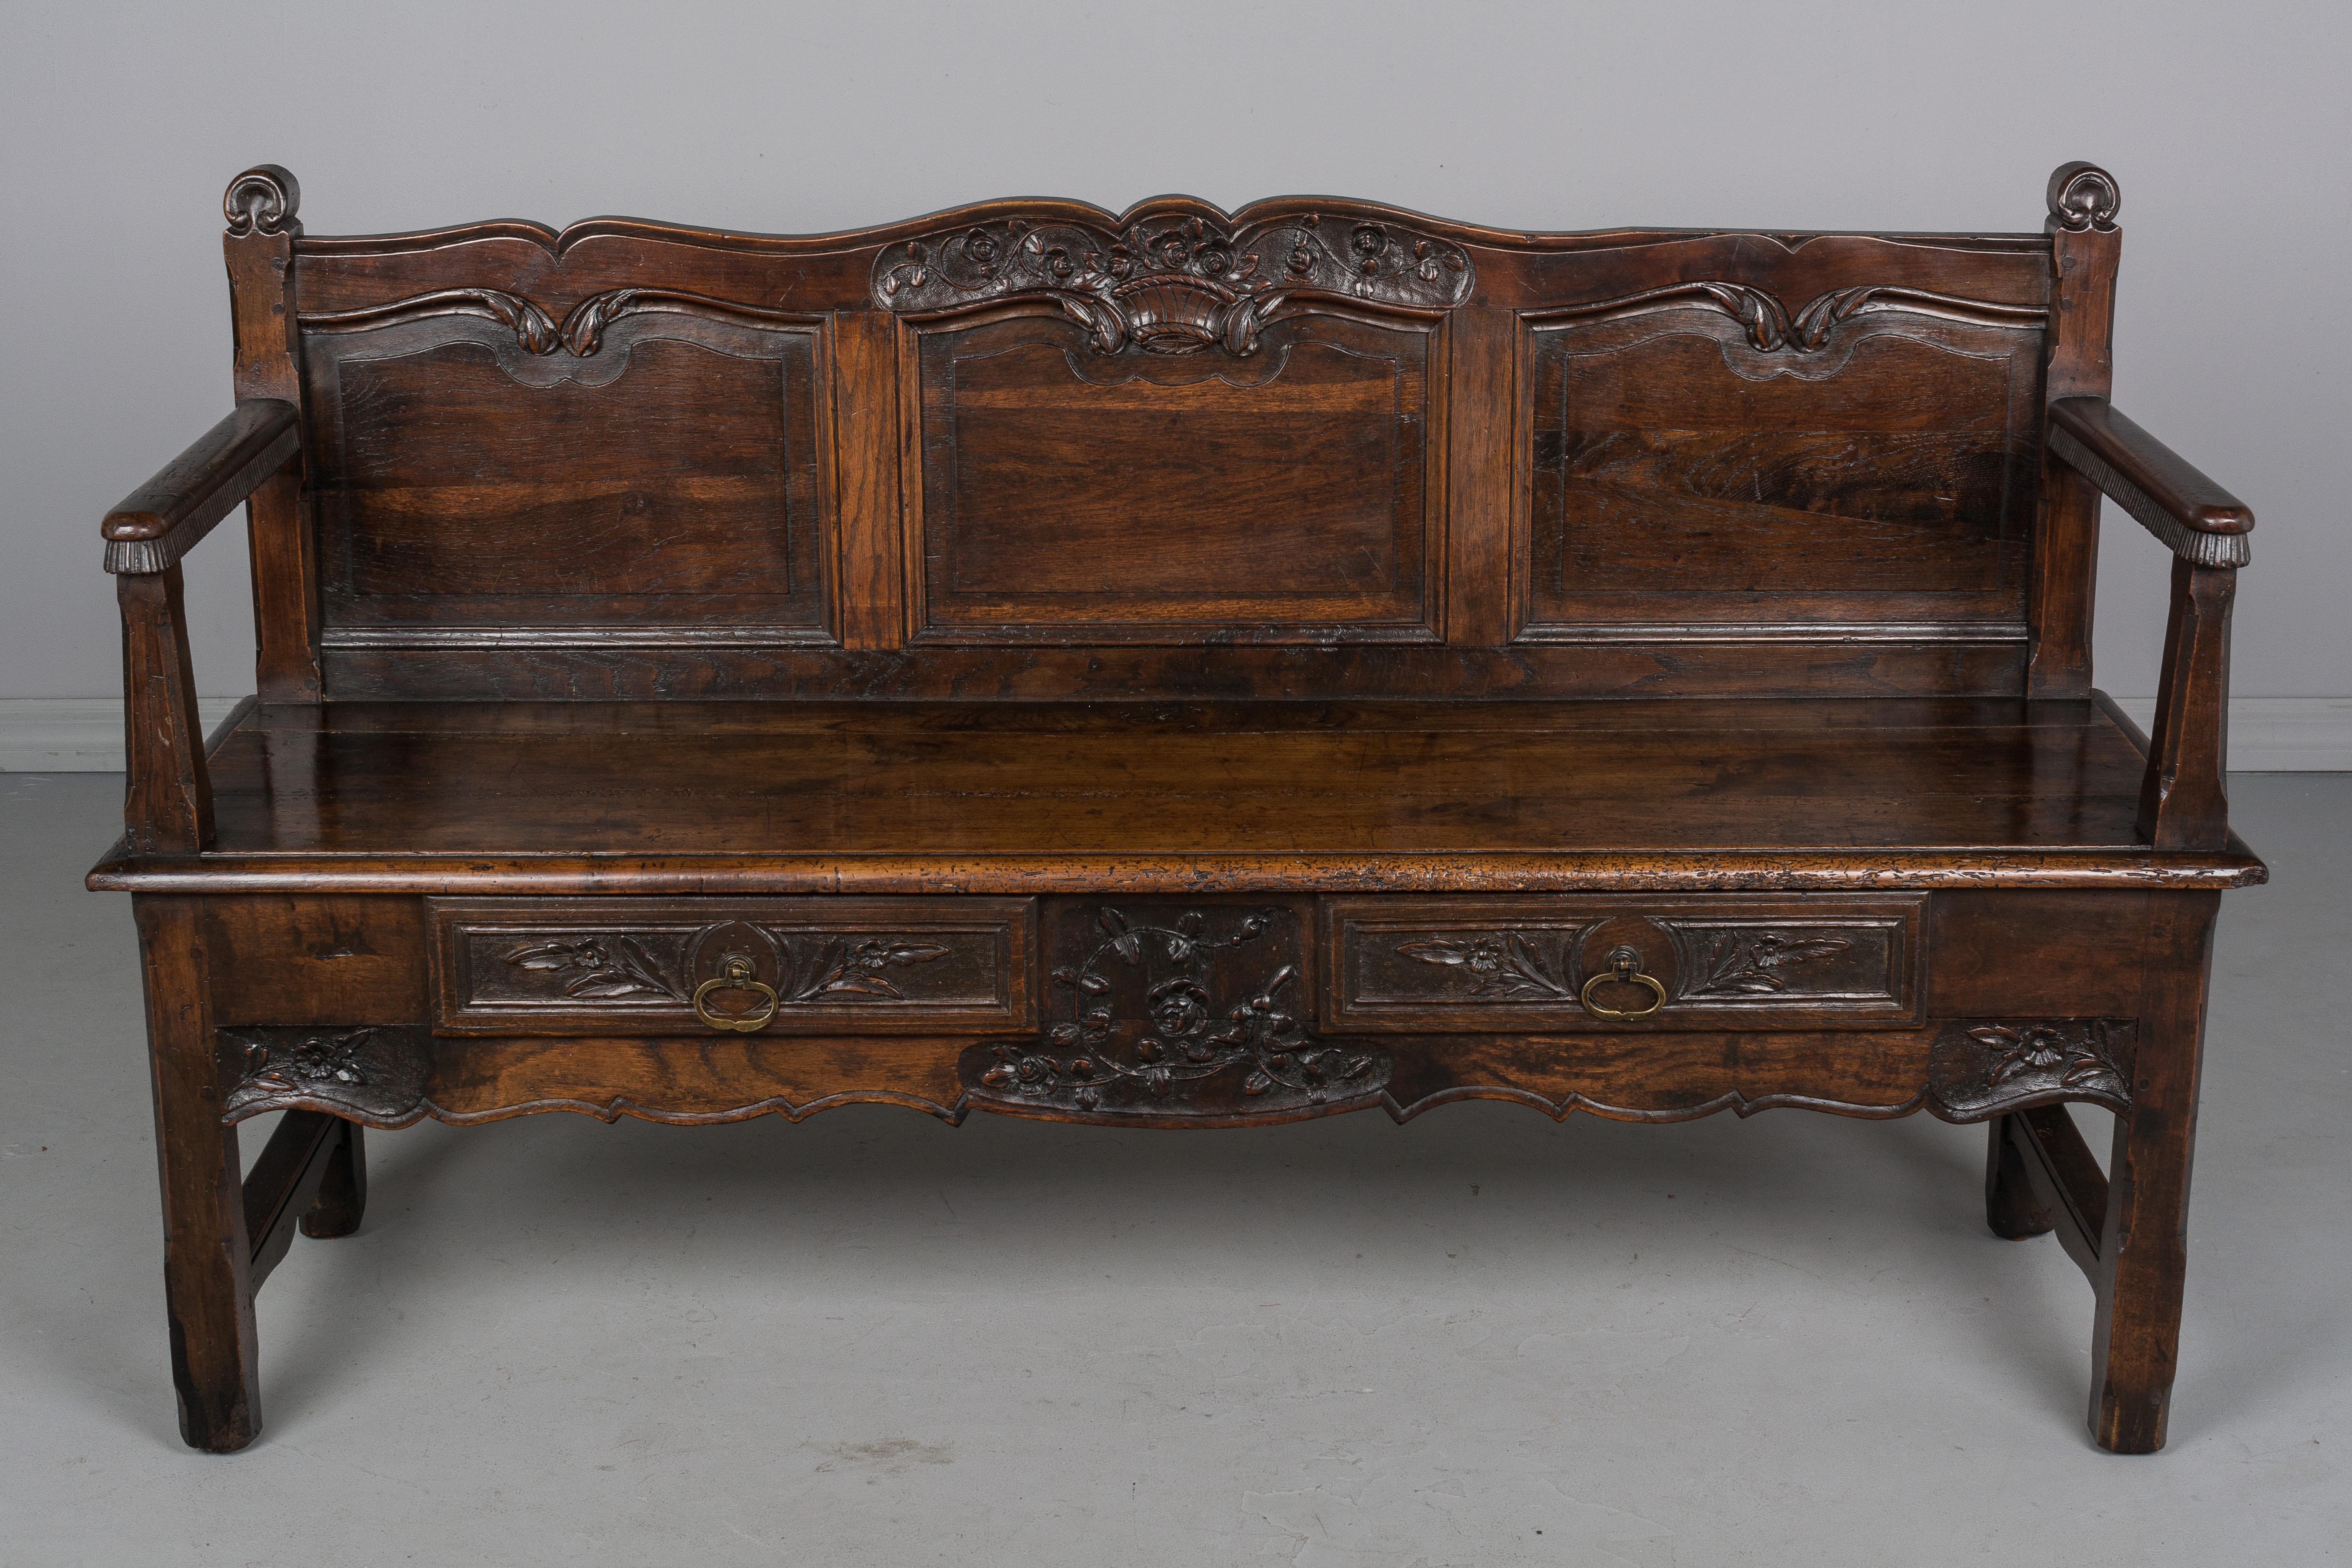 French Provincial Early 19th Century French Provencal Bench